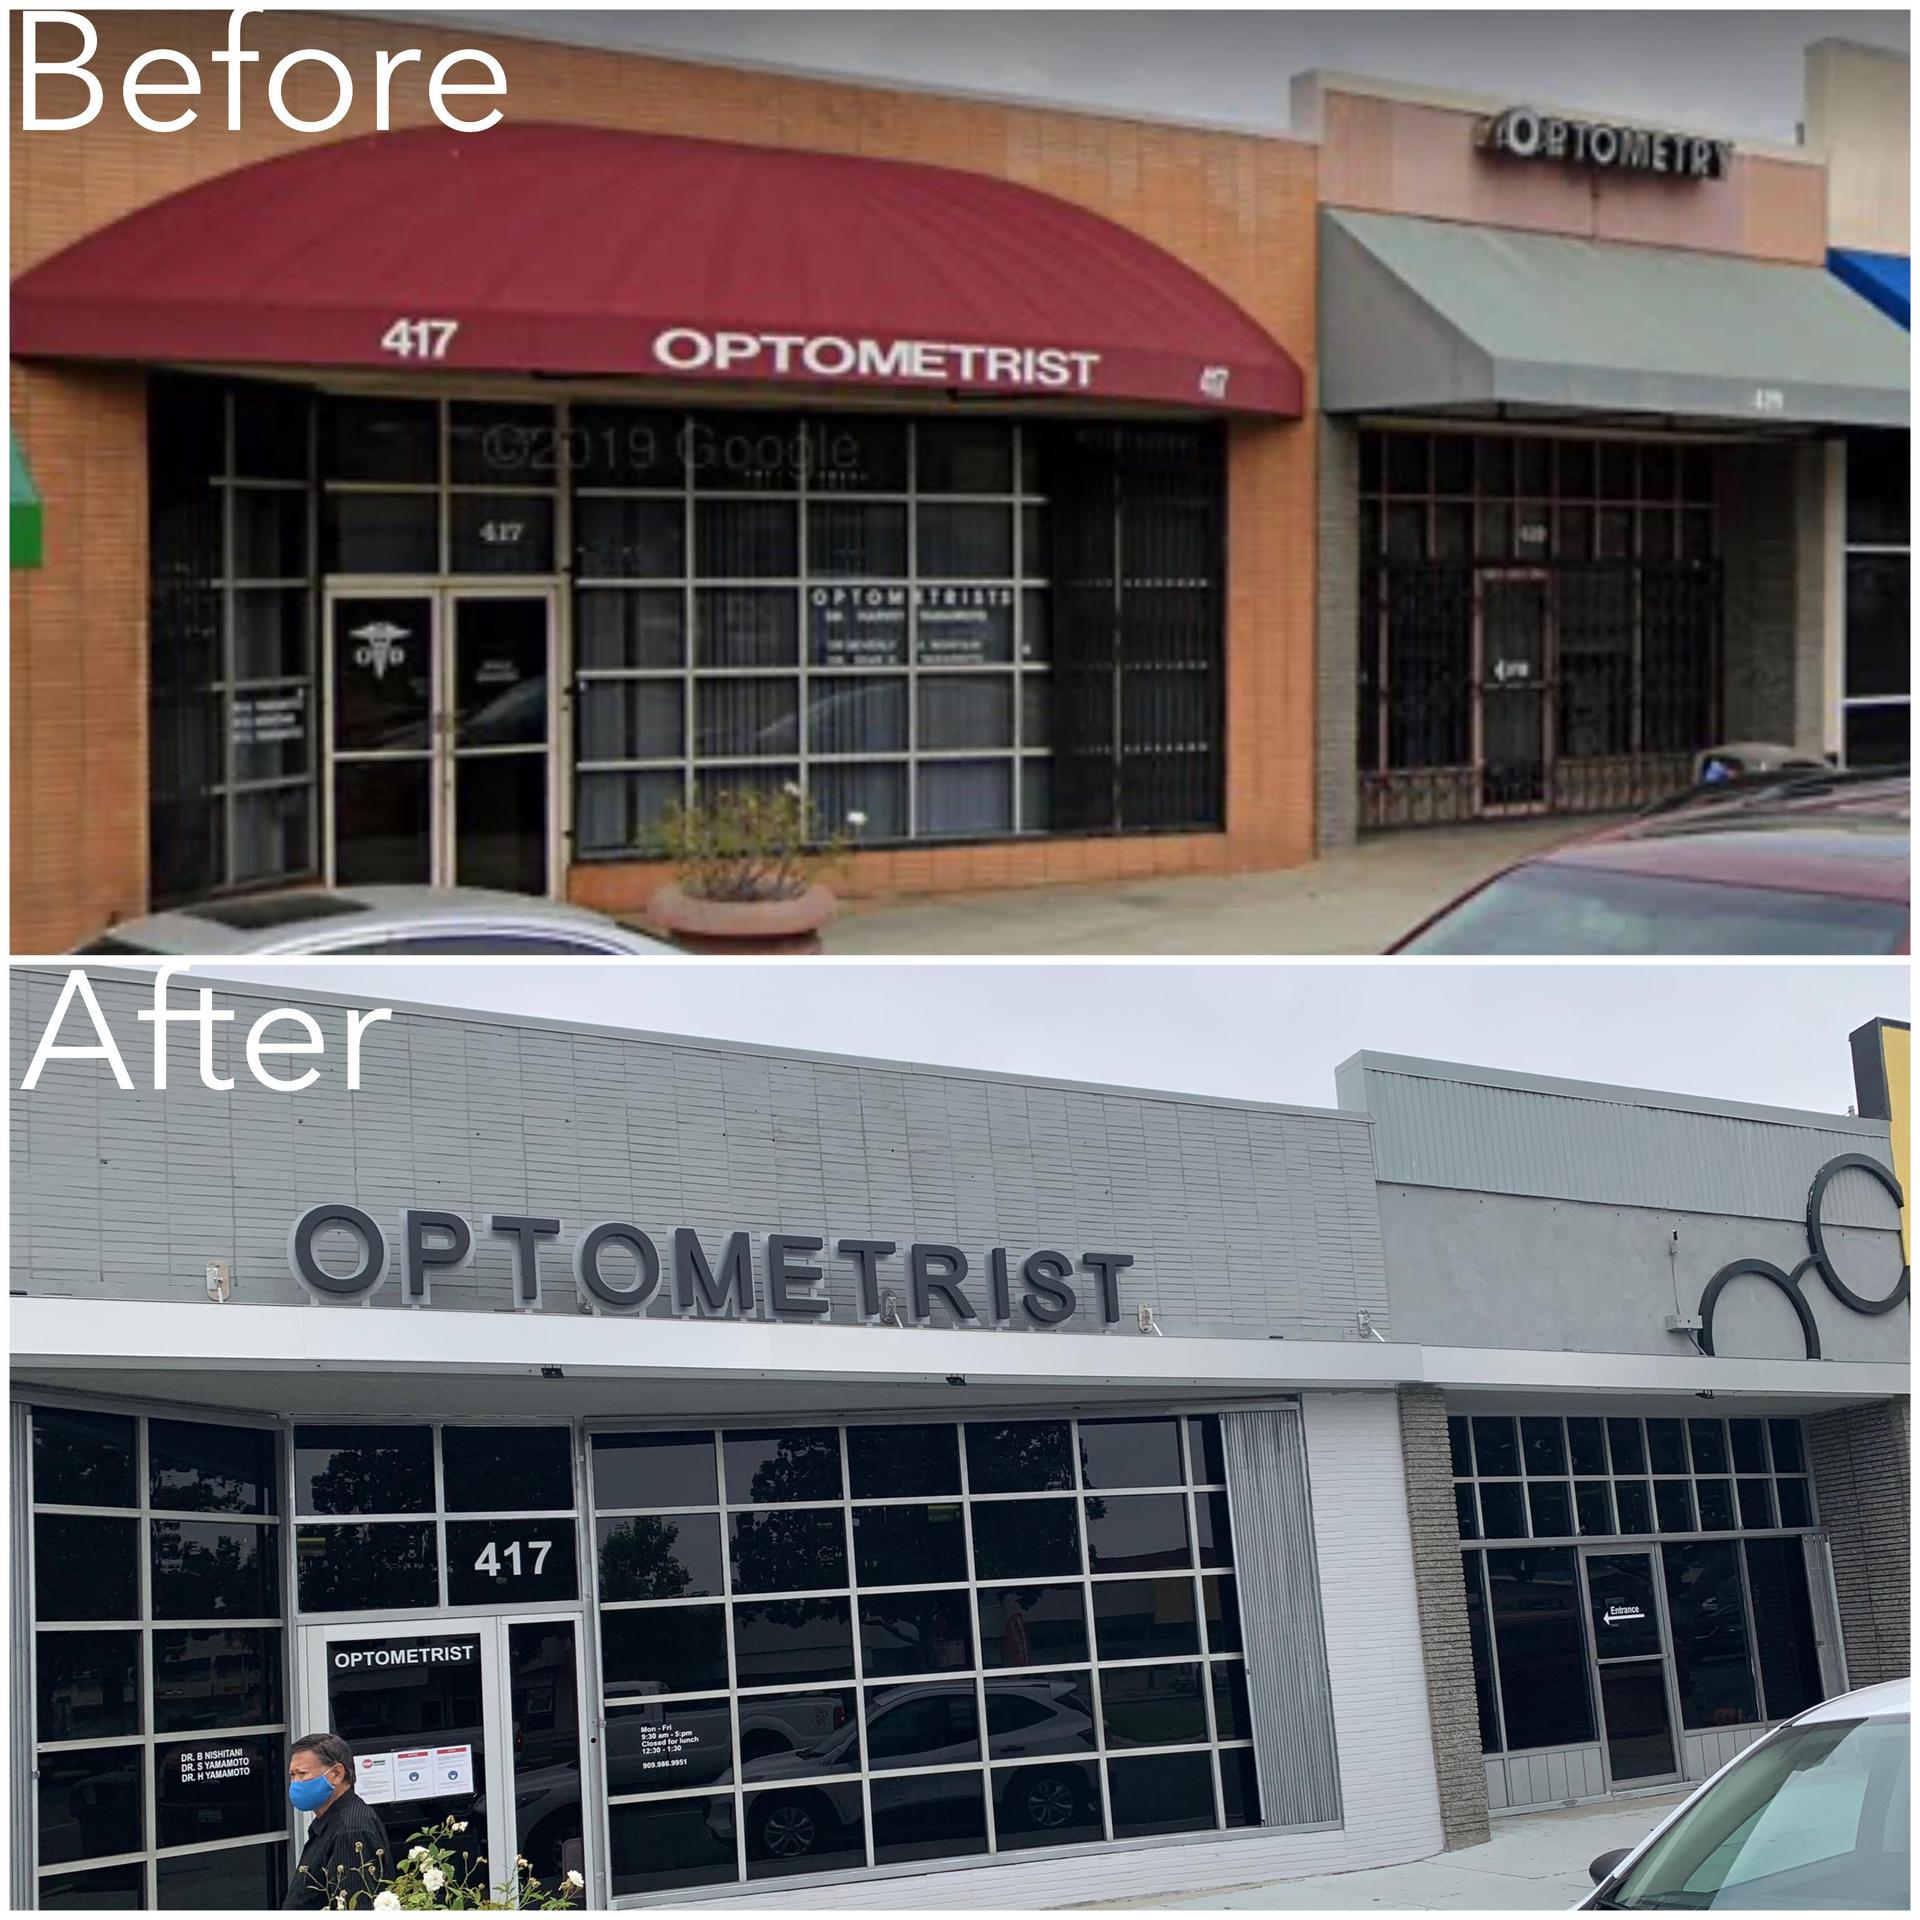 Before and after photos of a optometrist office remodel